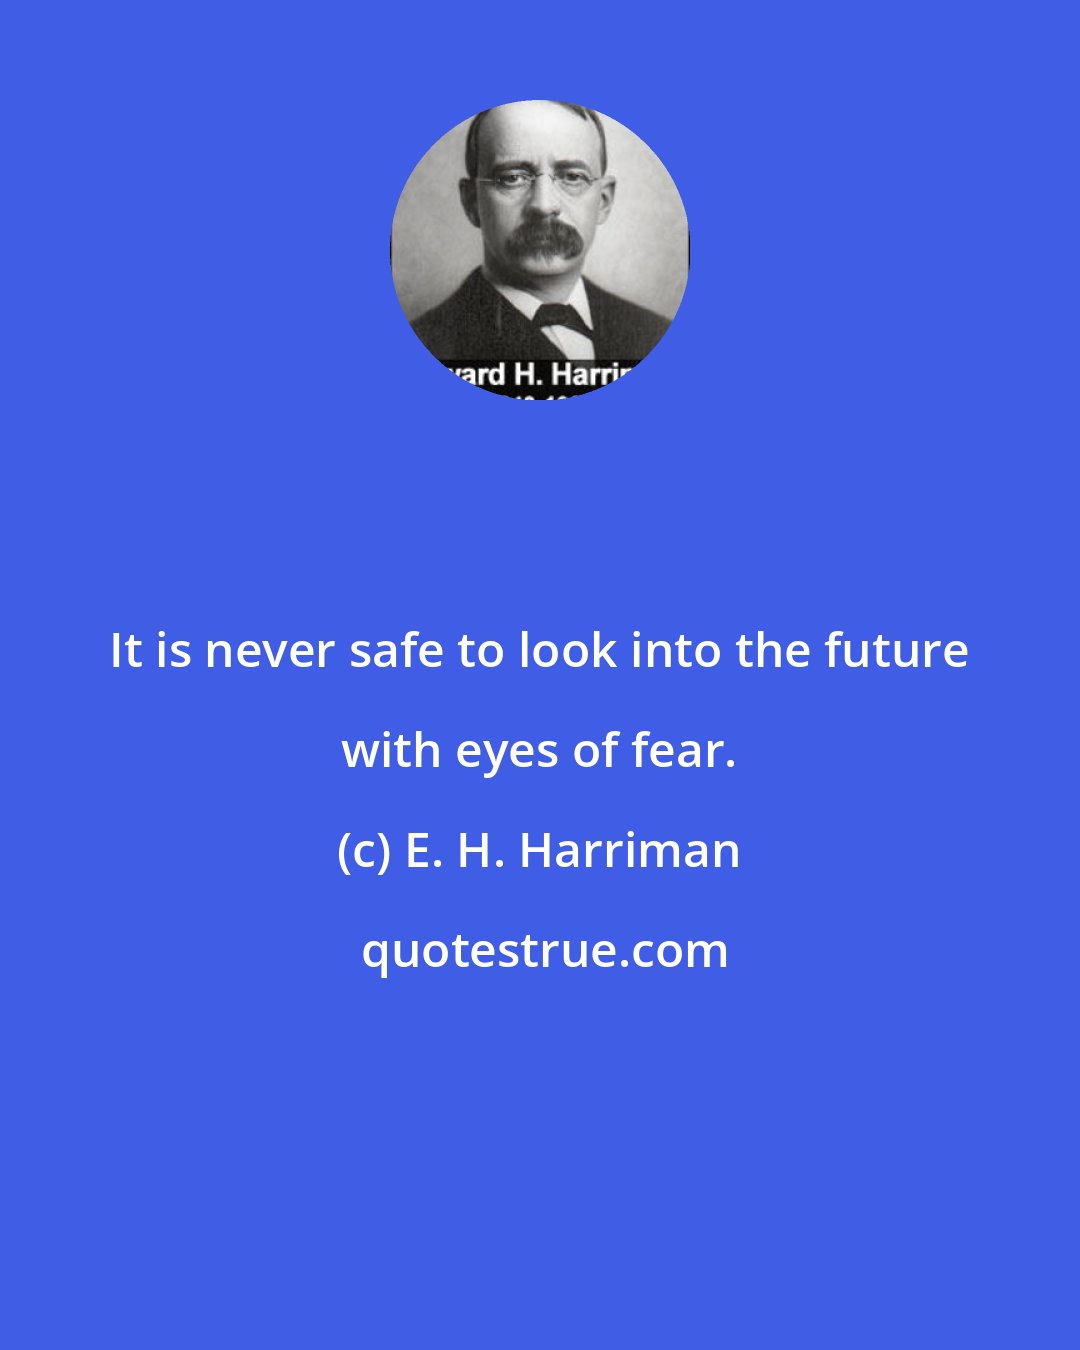 E. H. Harriman: It is never safe to look into the future with eyes of fear.